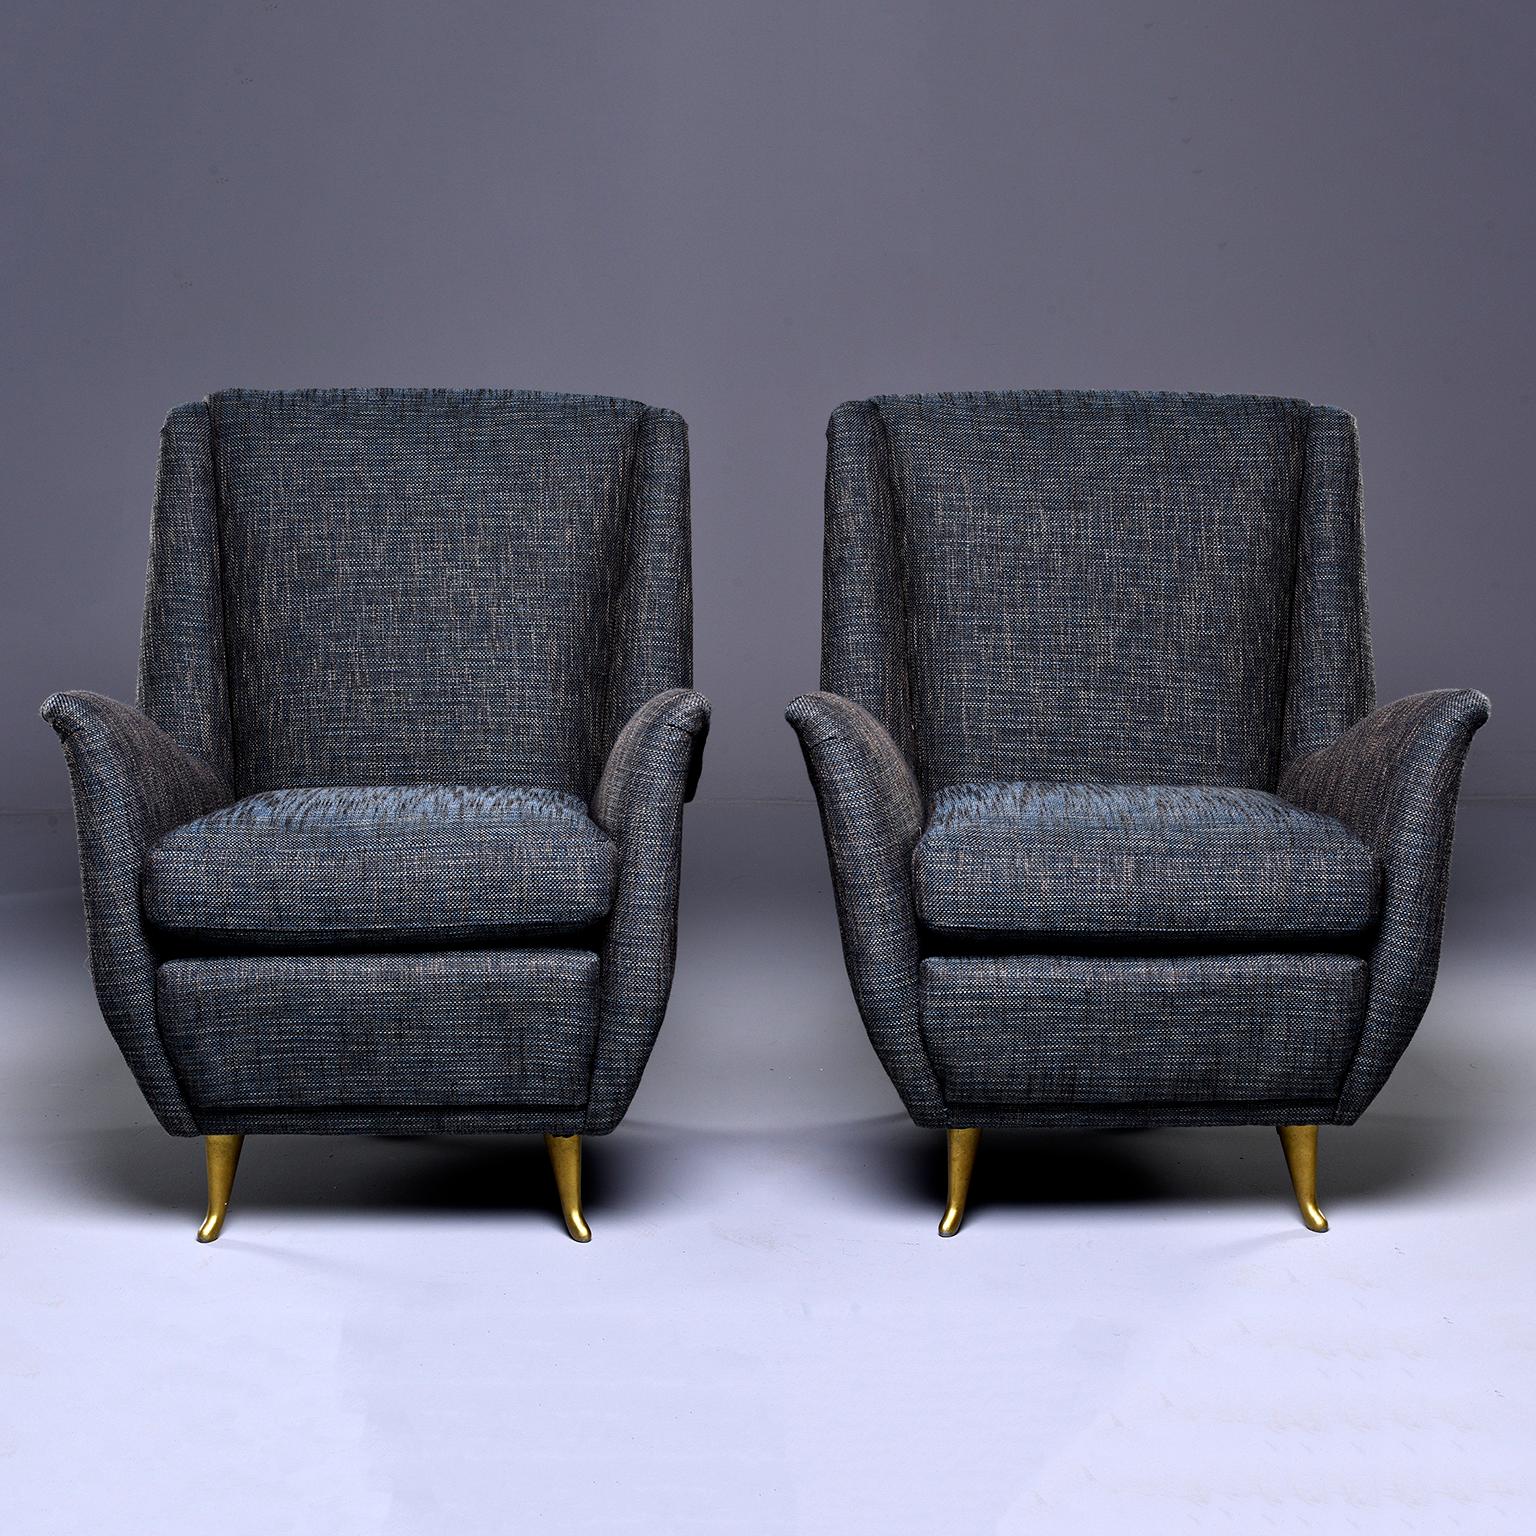 Pair of circa 1960s, Italian armchairs are newly upholstered in a blue and taupe tweed. Curvy lines with flared arms and side wings, high backrests and gold metal legs/feet. Found in Italy. Unknown maker, but in the style and period of Paolo Buffo.